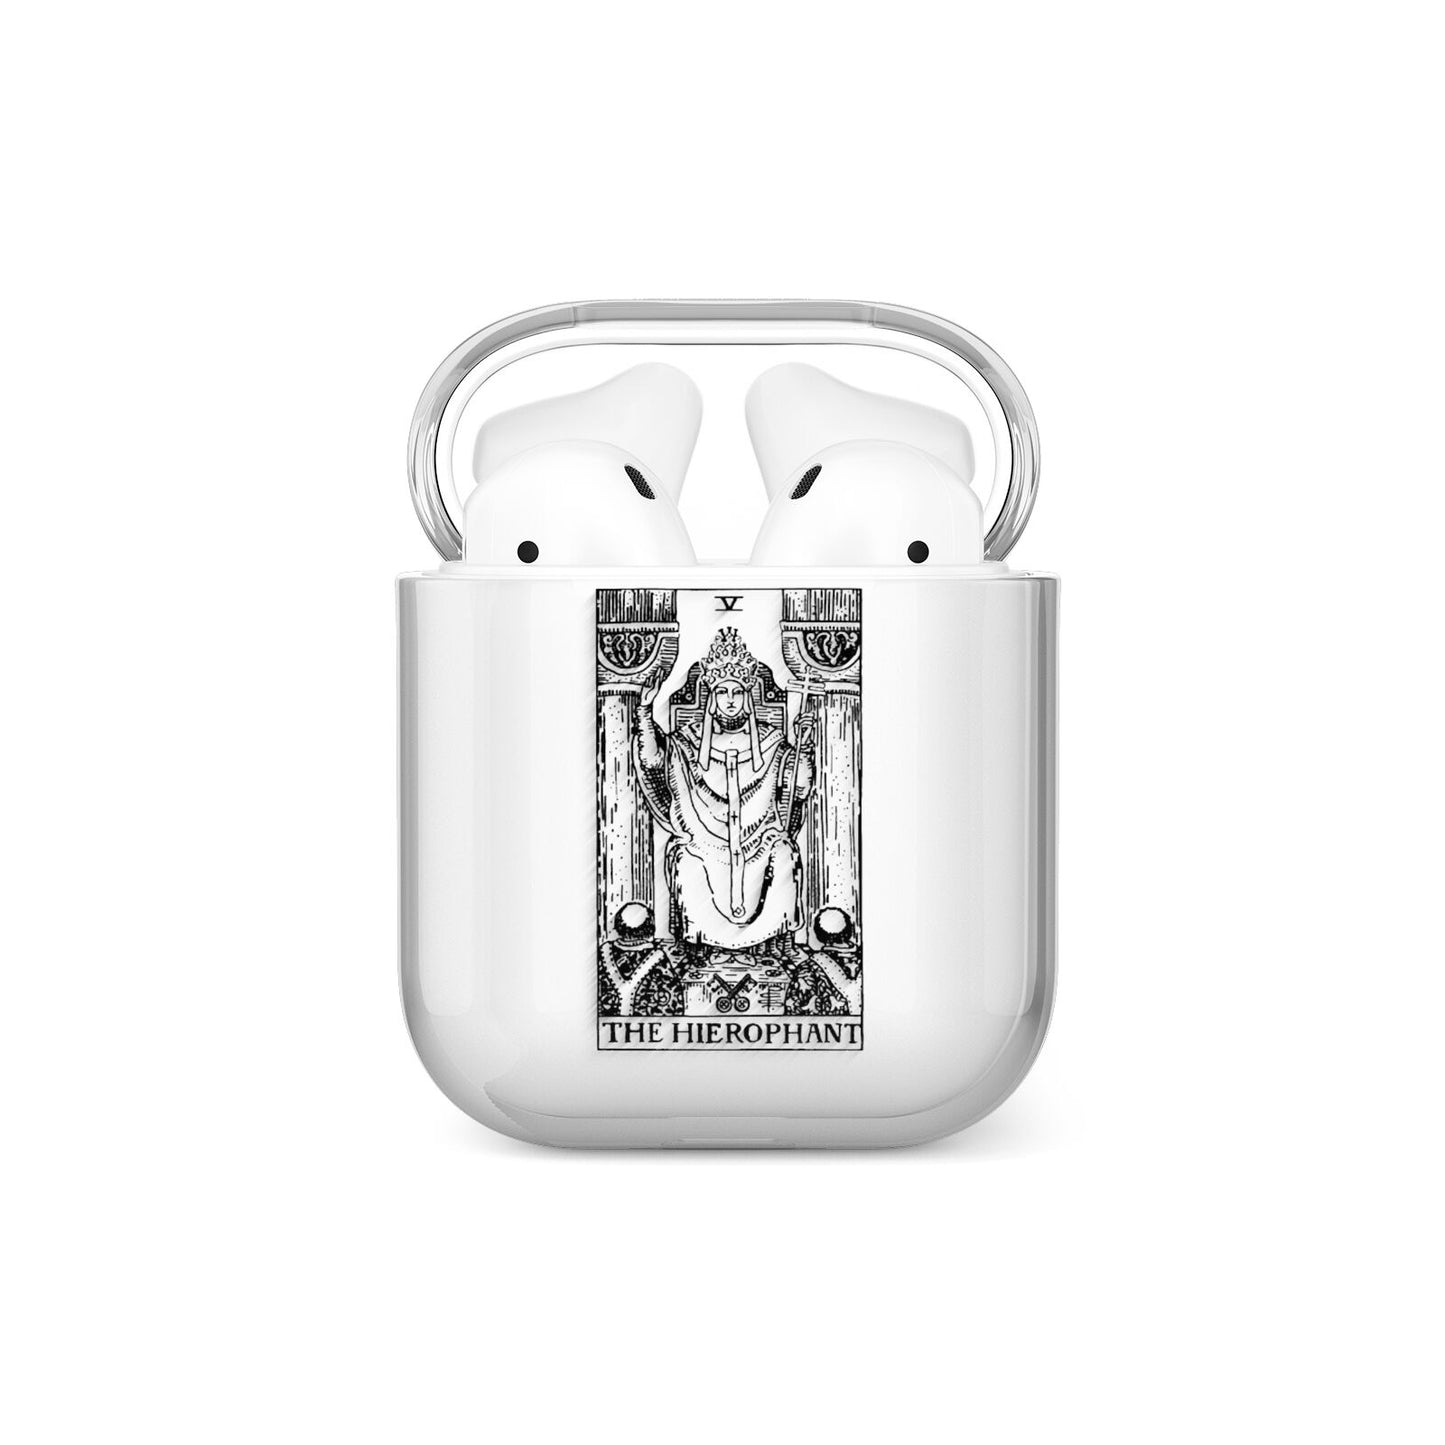 The Hierophant Monochrome Tarot Card AirPods Case